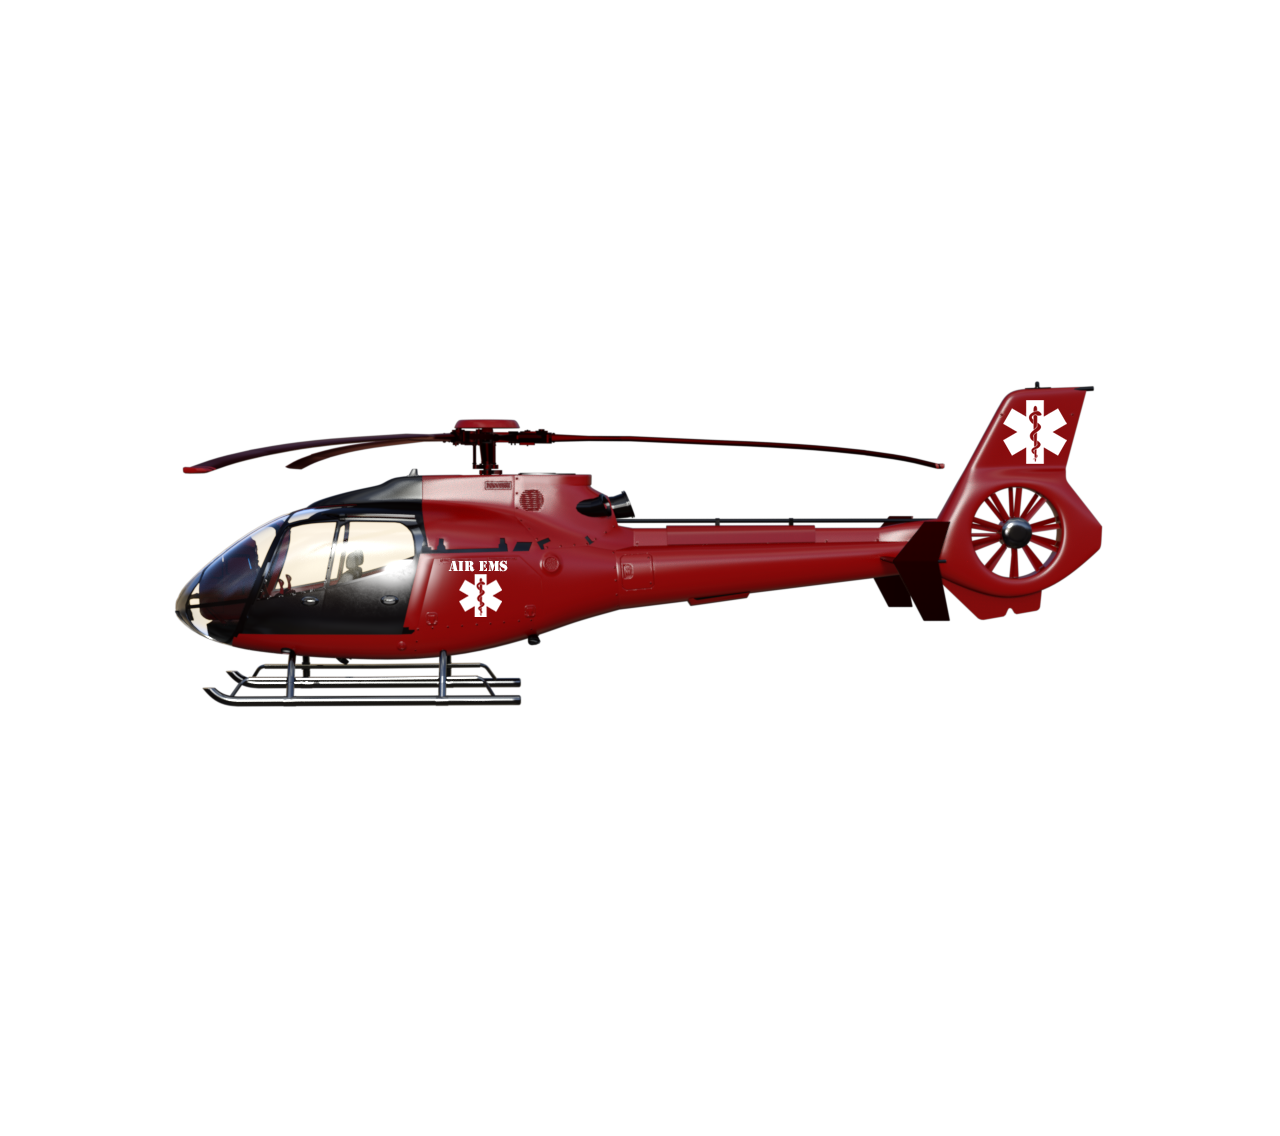 EMERGENCY HELICOPTER